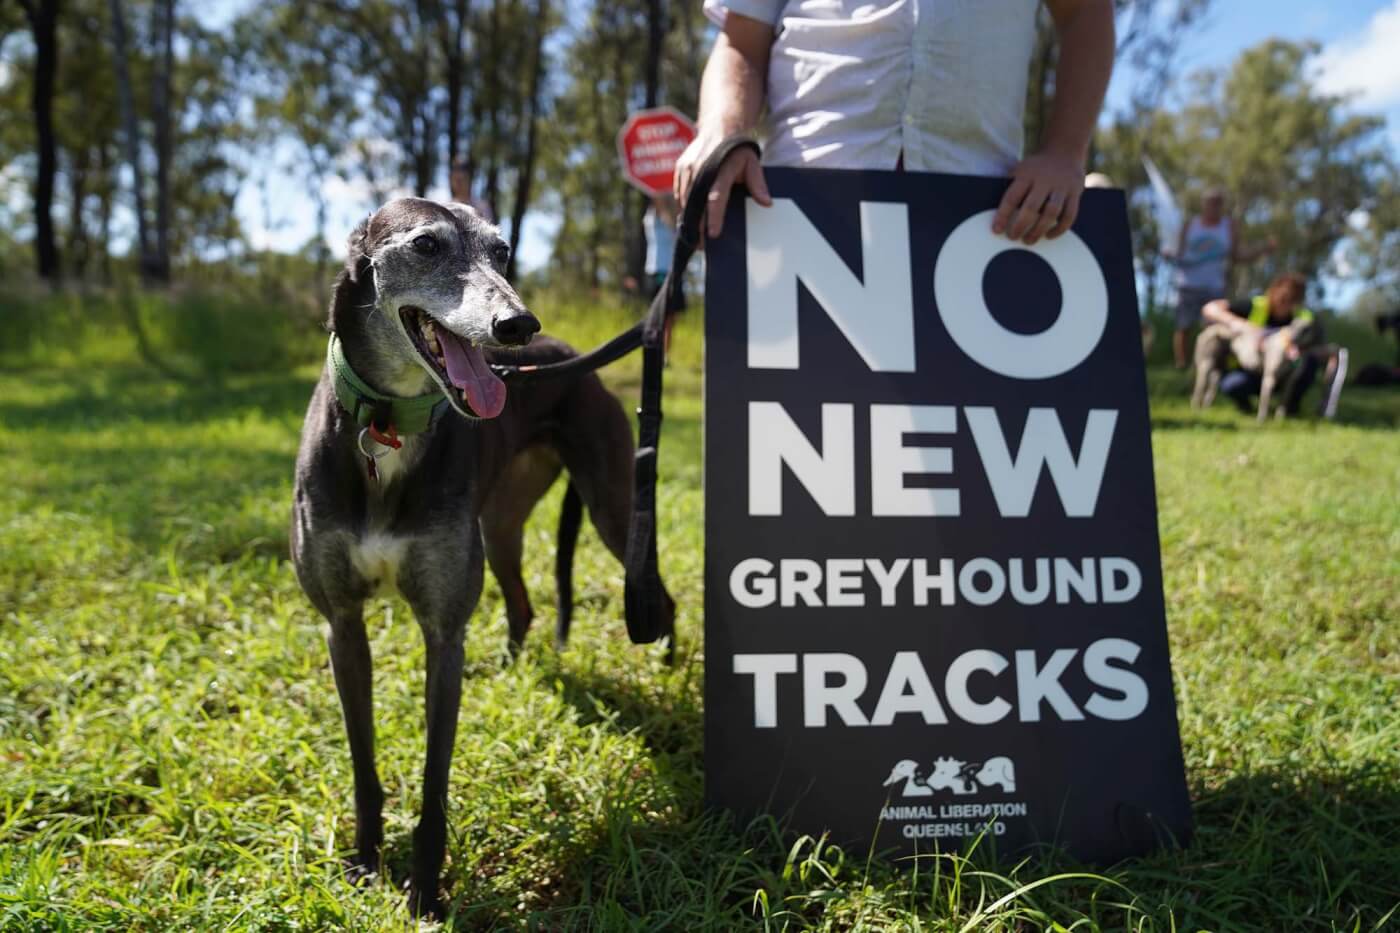 A greyhound and a sign that reads "no new greyhound tracks"